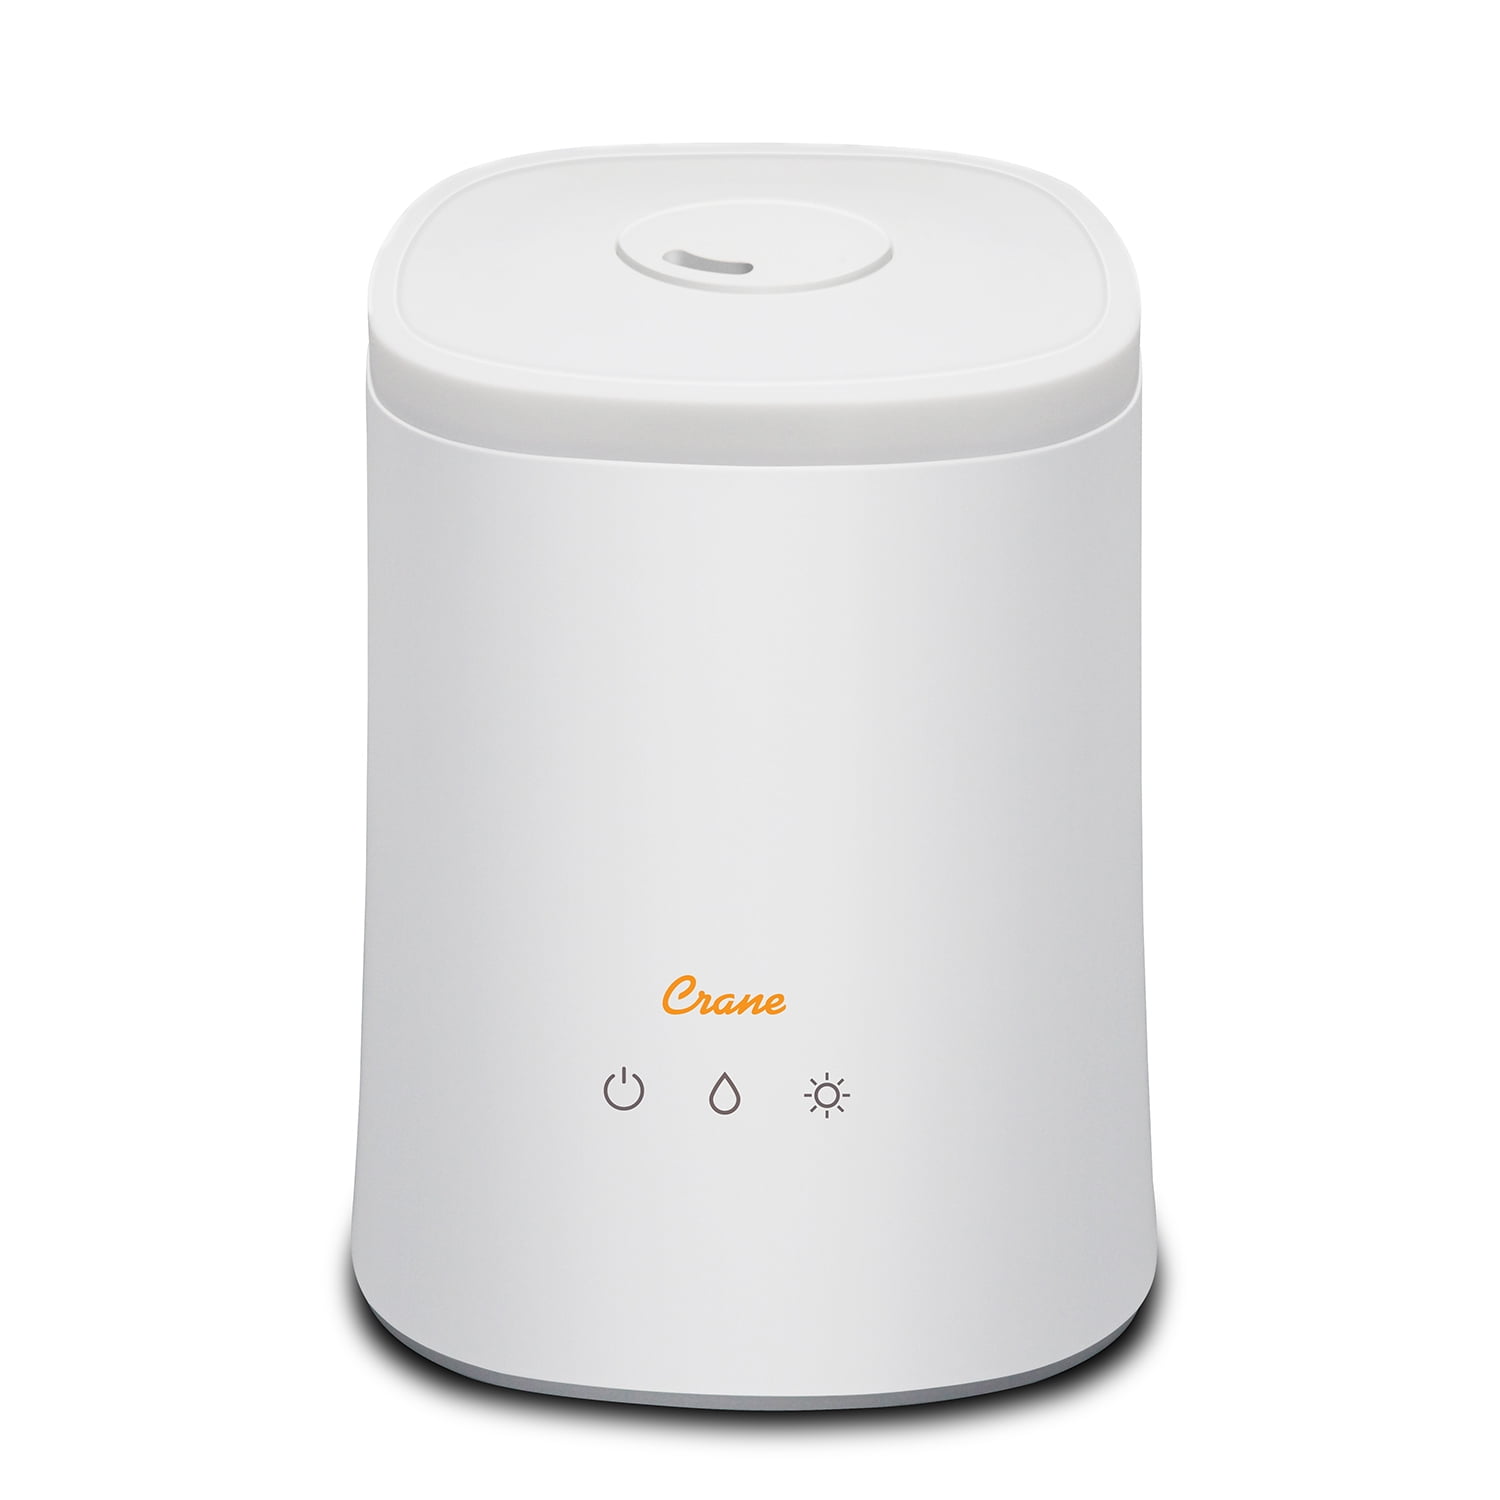 Crane USA 1.2 Gallon 2-in-1 Ultrasonic Cool Mist Top Fill Humidifier & Aroma Diffuser for medium to large rooms up to 500 sq ft